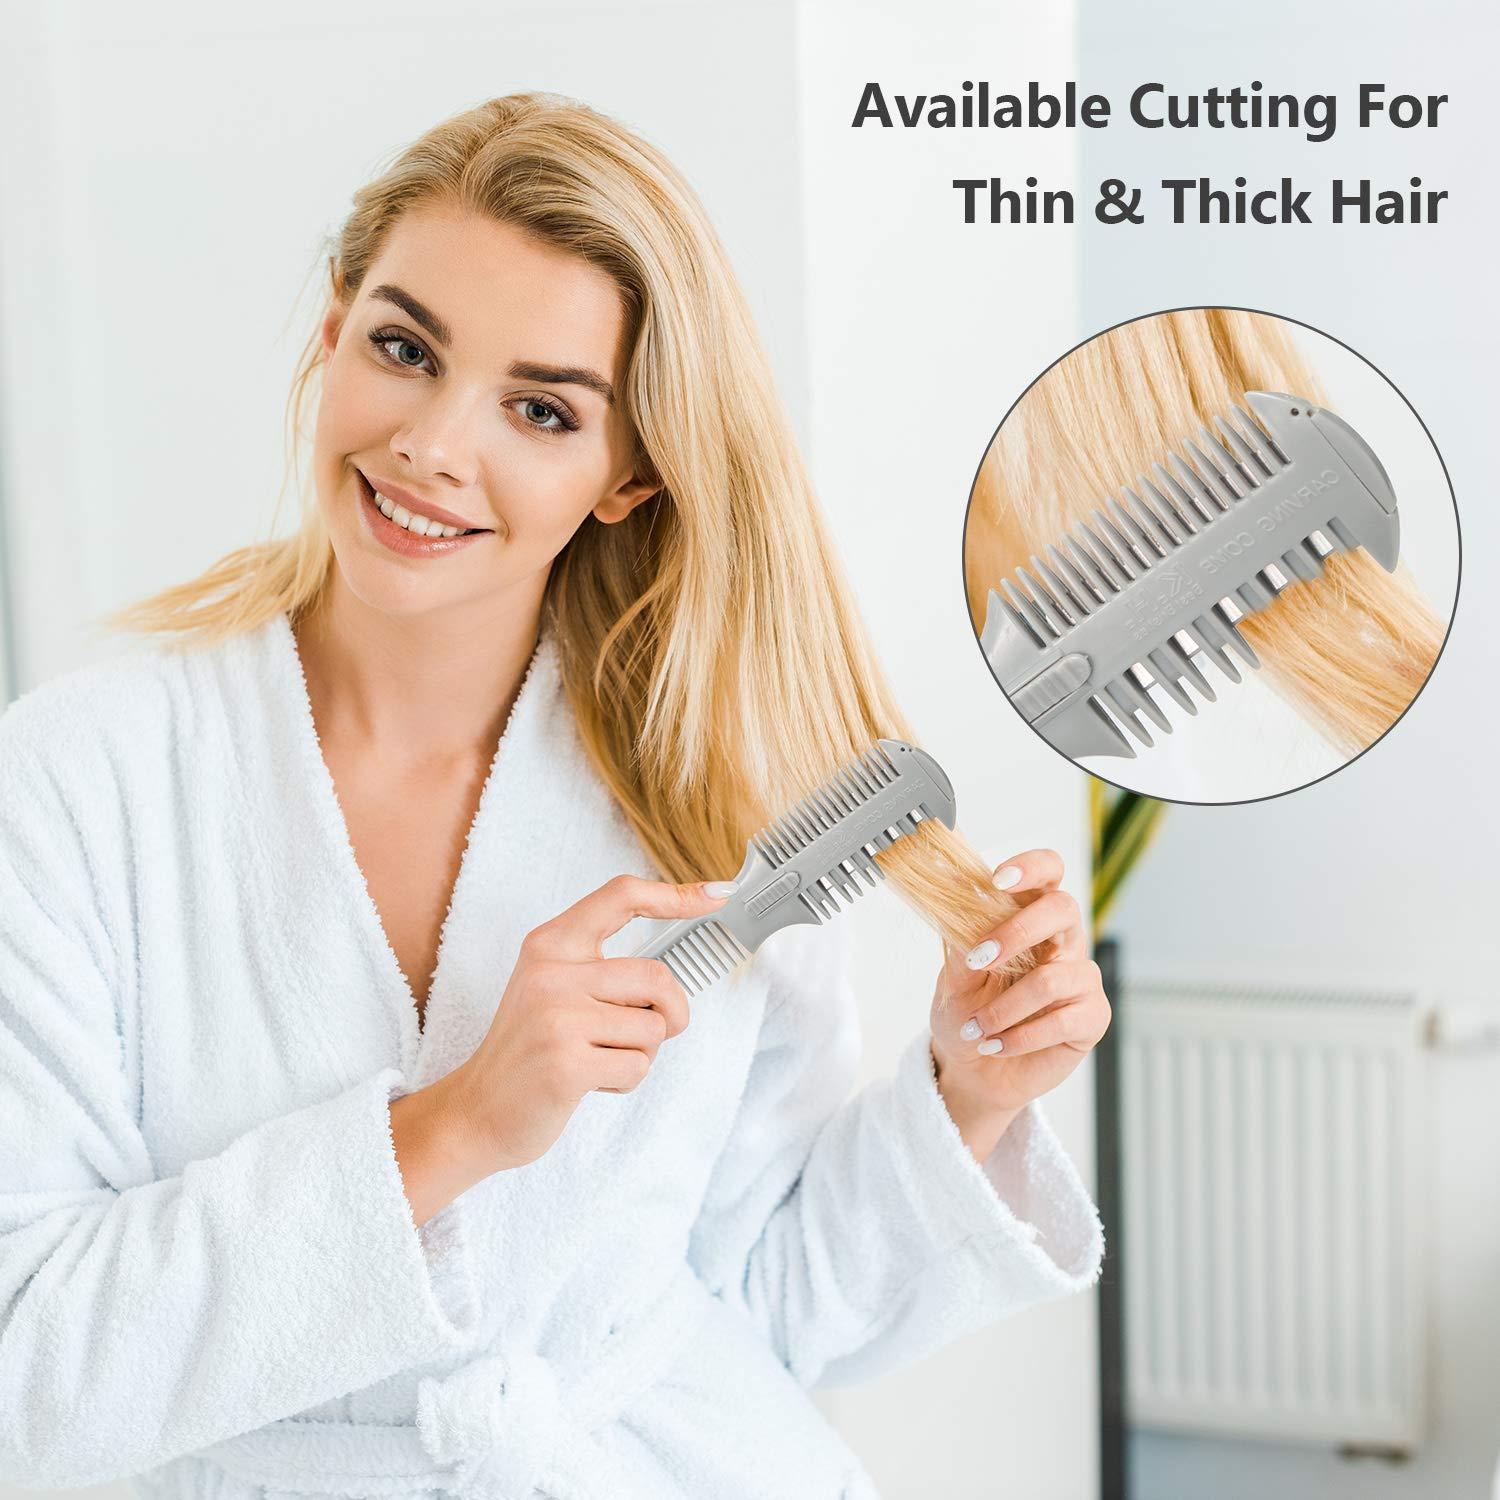 3 Pieces Hair Cutter Comb Double Sided Hair Razor Comb Hair Thinning Comb Styling Razor Combs with 10 Pieces Blade, Hair Shaper Razor with for Hair Thinning Cutting Styling